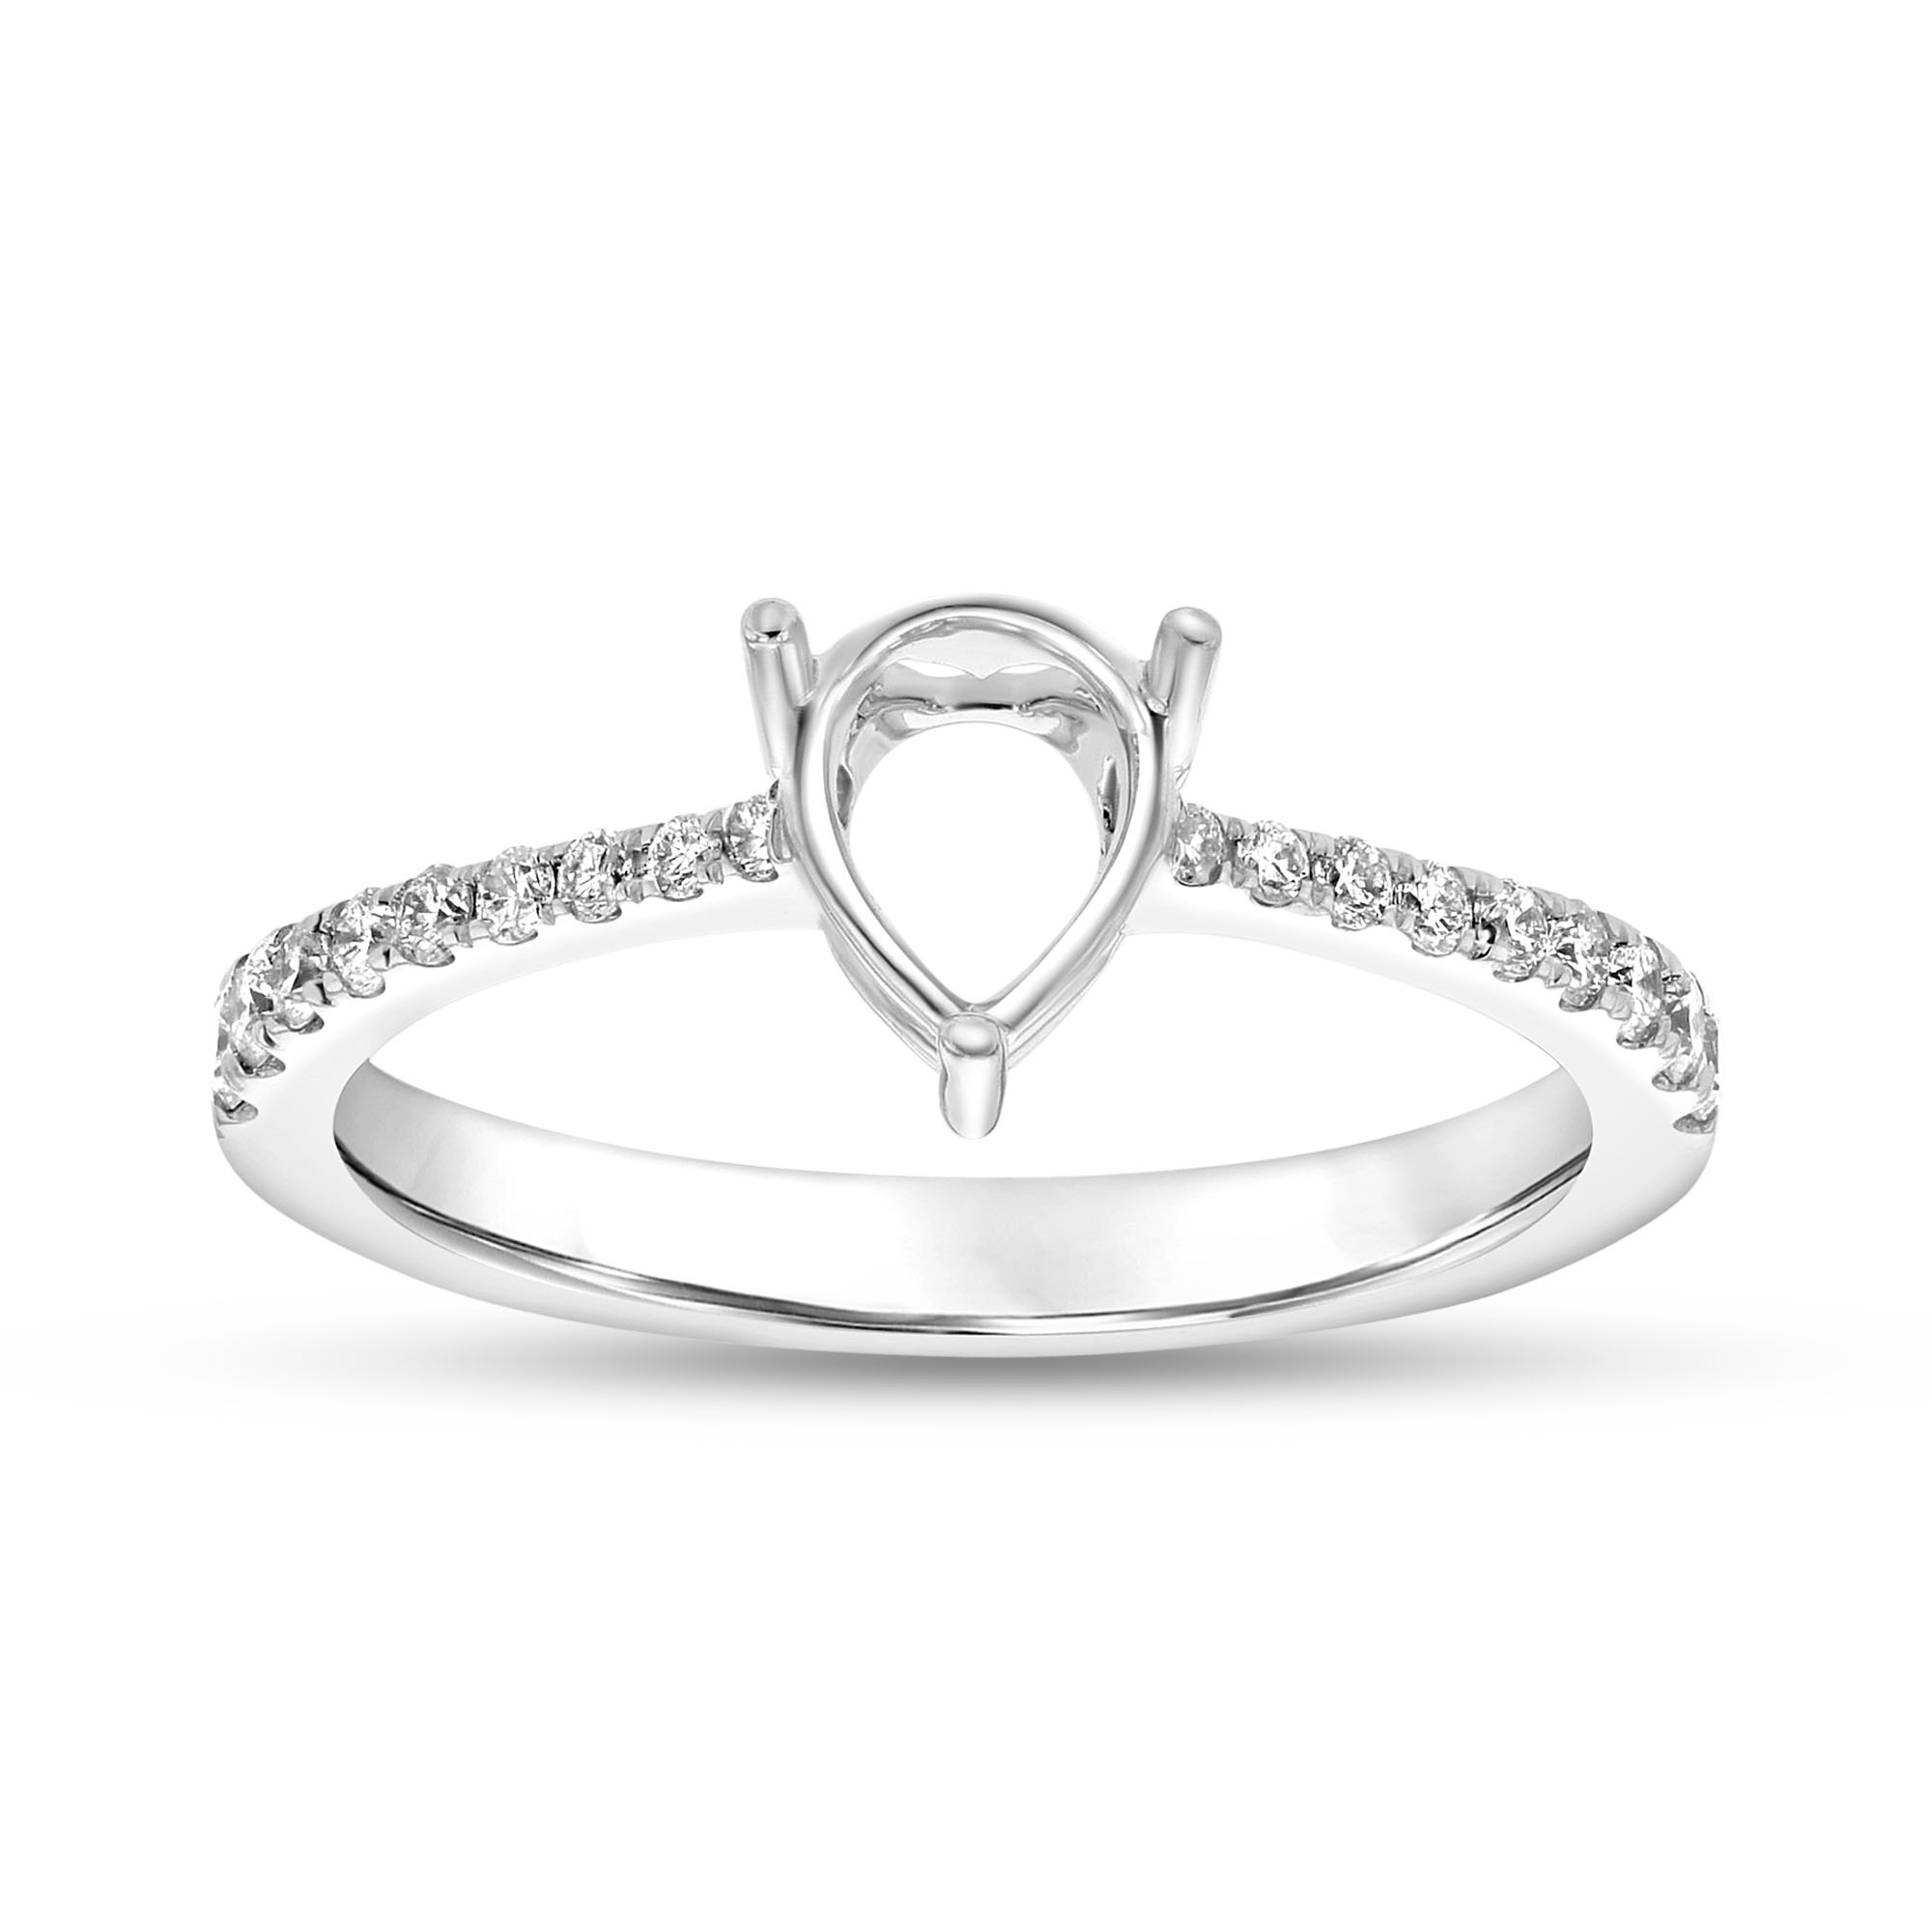 View 0.23ctw Diamond Semi Mount Engagement Ring in 14k White Gold